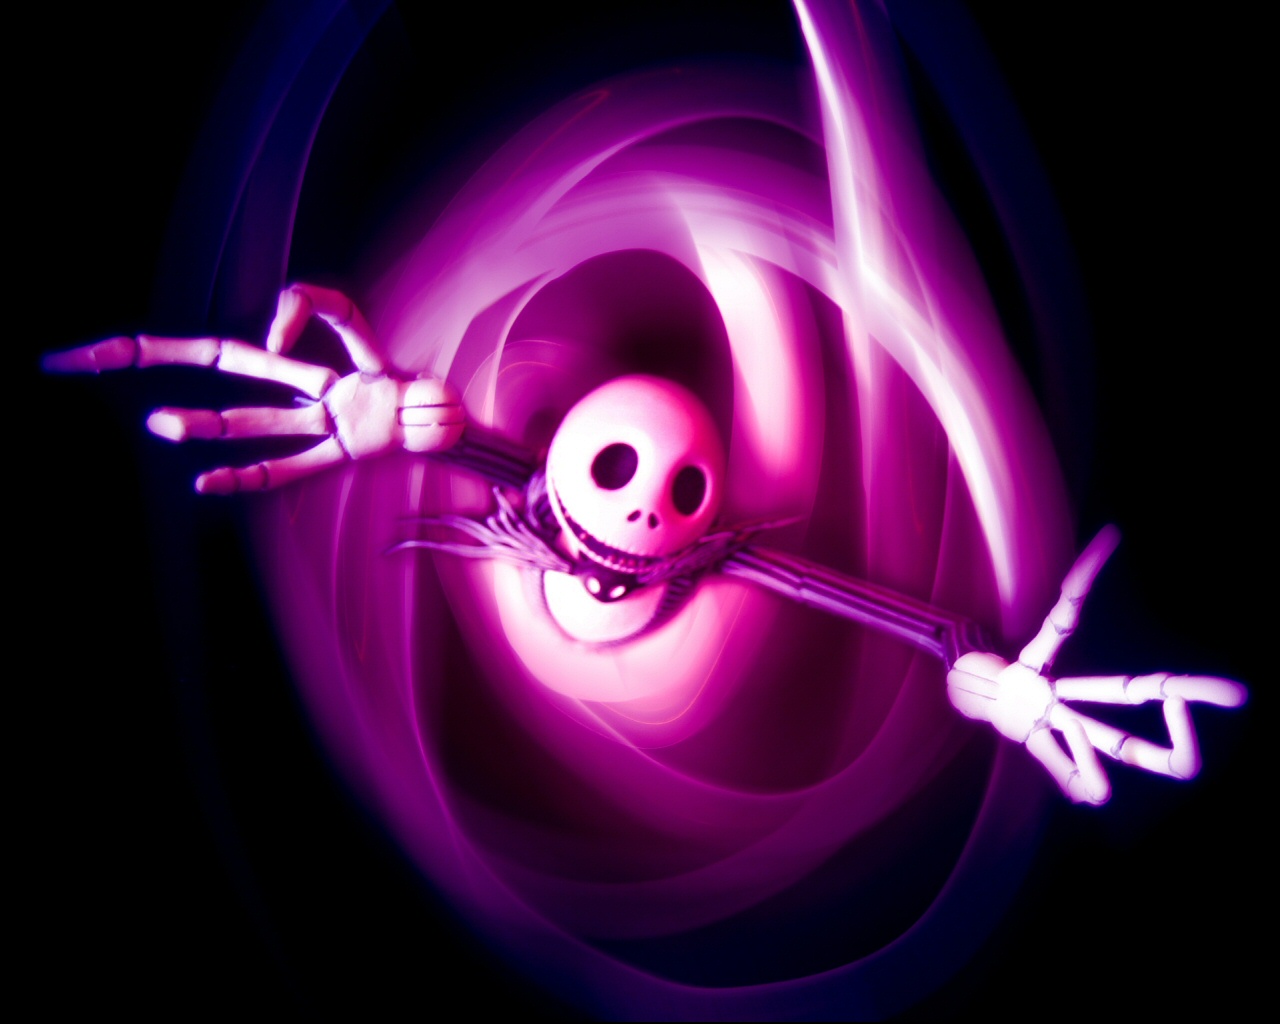 The Nightmare Before Christmas iPhone wallpapers